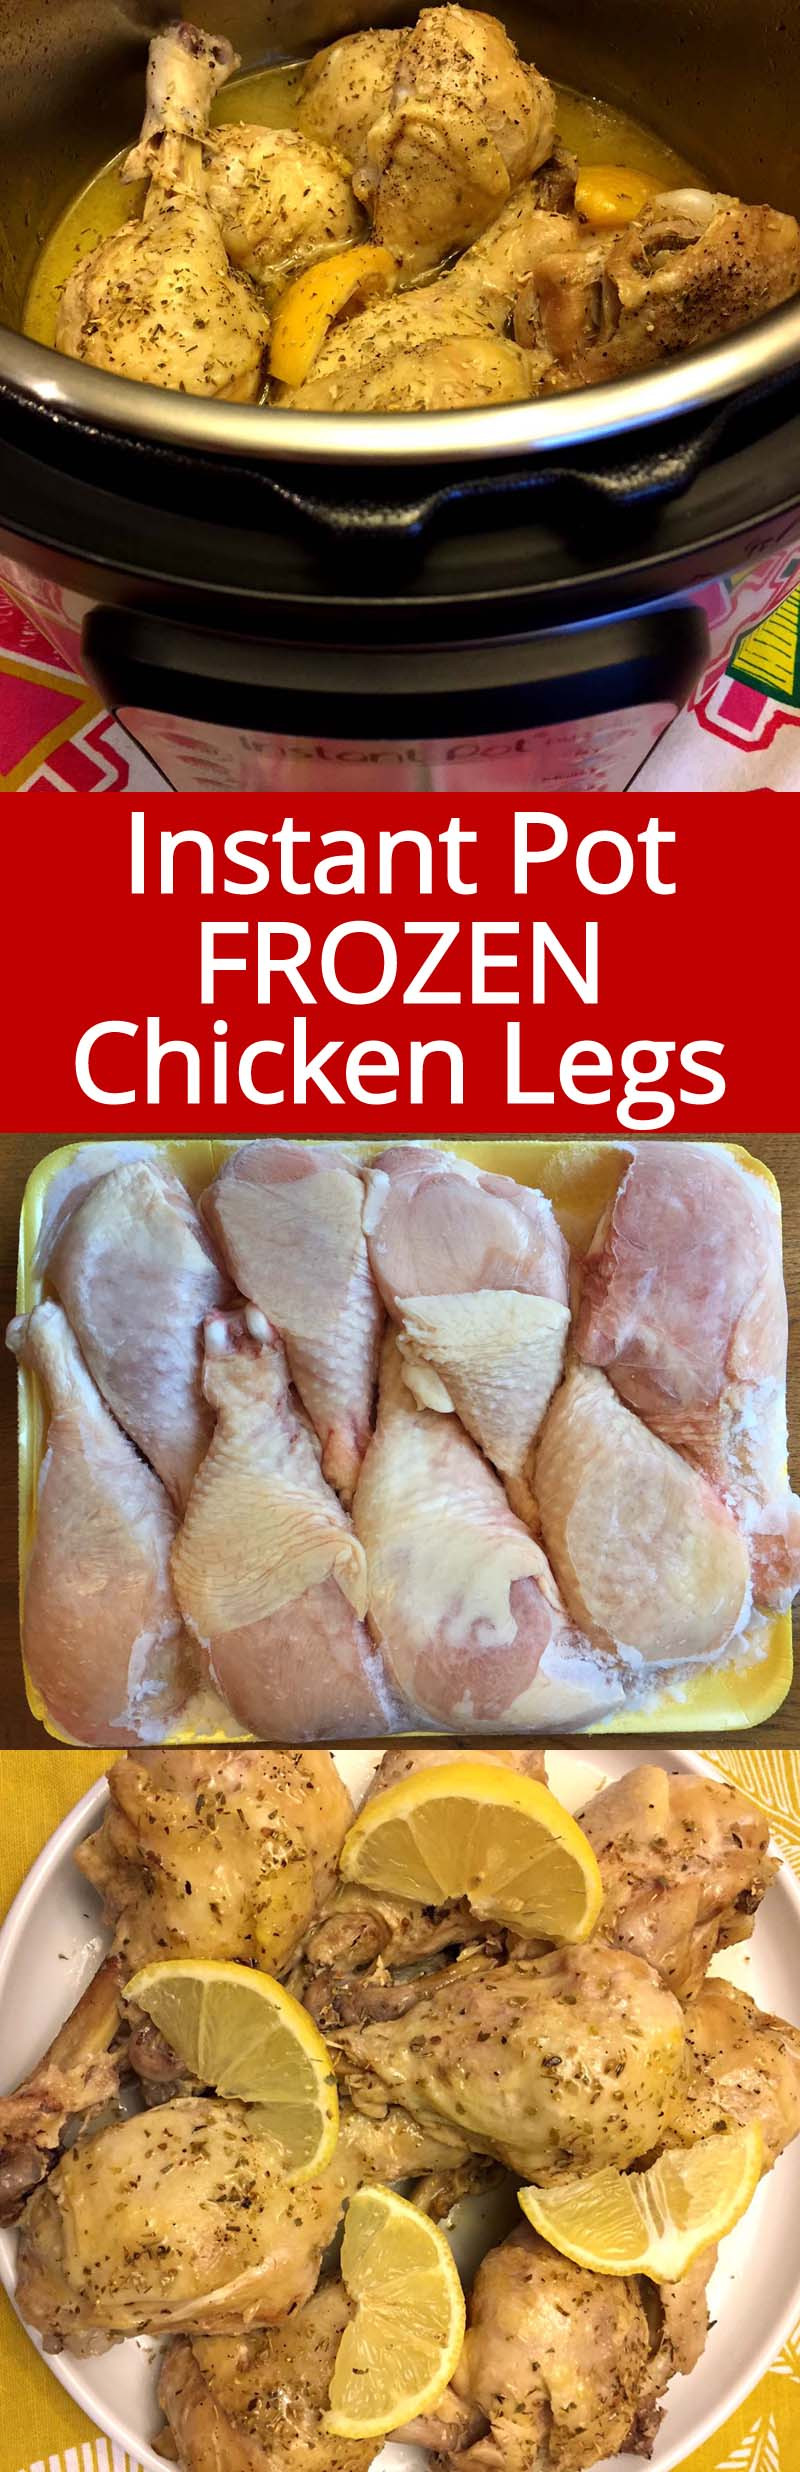 How Long To Cook Chicken Thighs In Instant Pot
 Instant Pot Frozen Chicken Legs With Lemon And Garlic